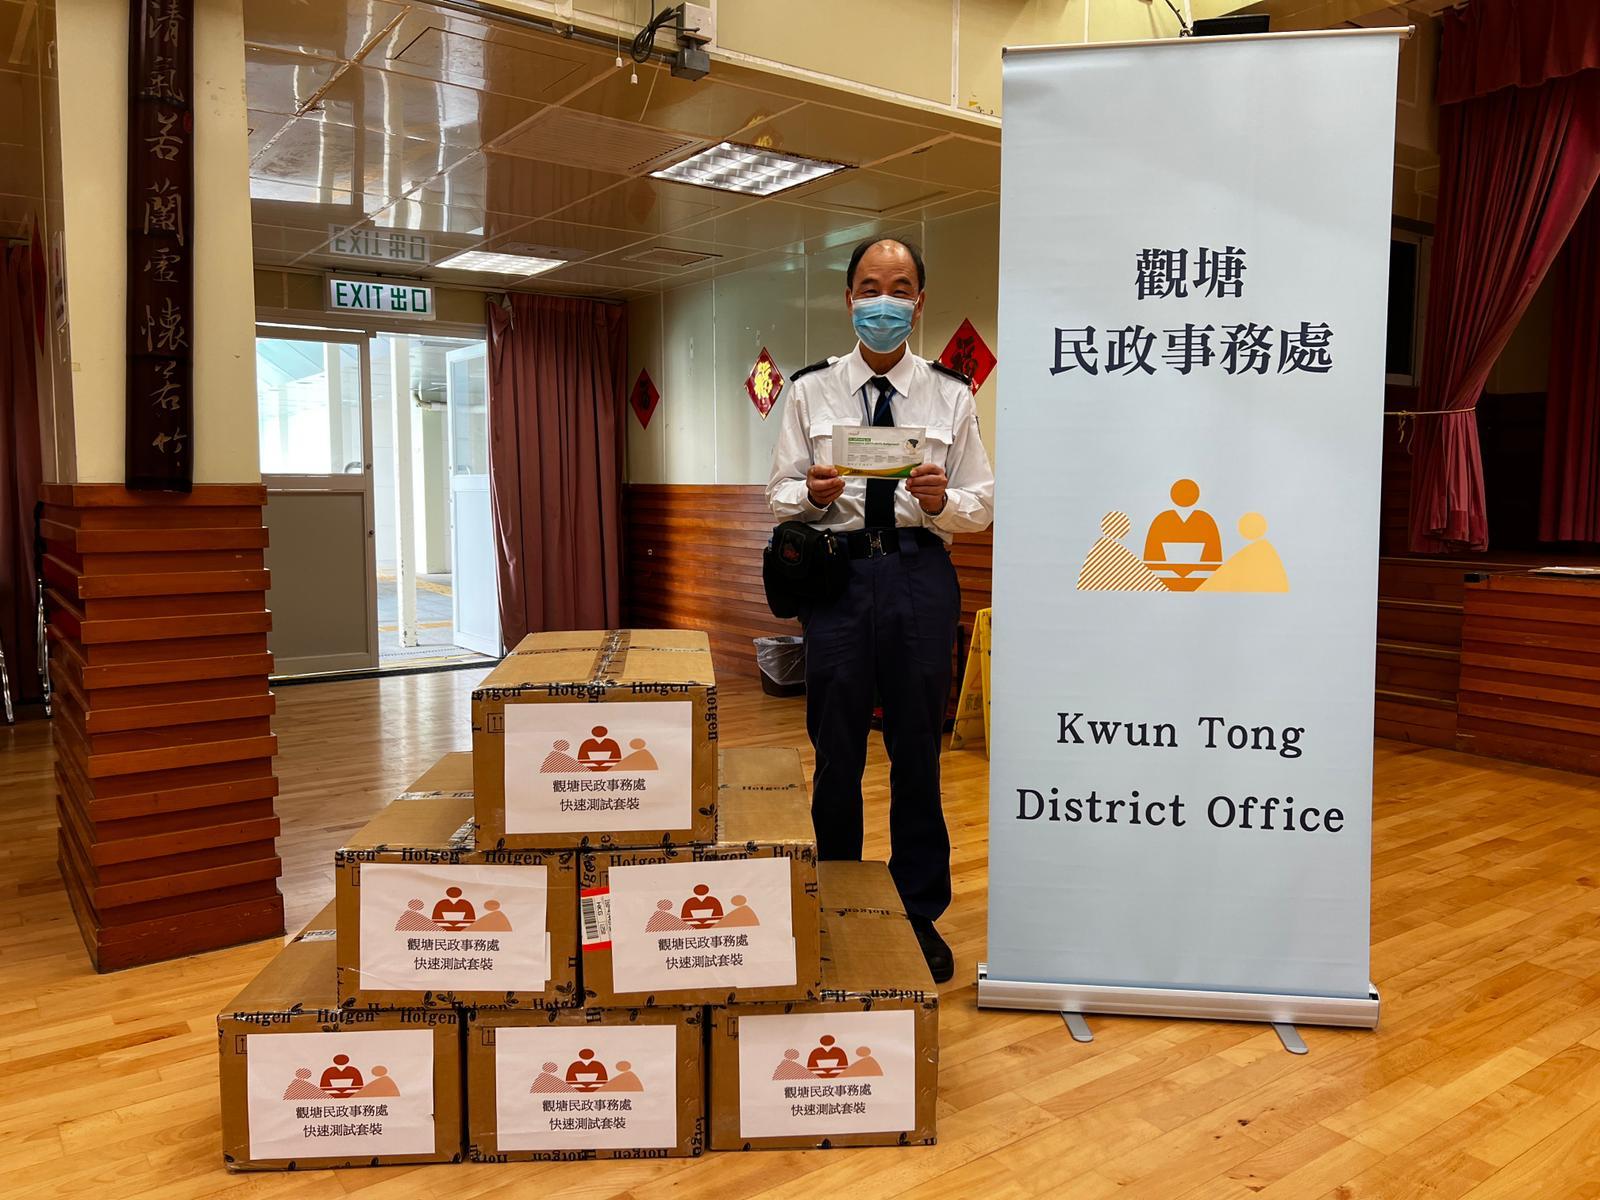 The Kwun Tong District Office today (February 27) distributed rapid test kits to households, cleansing workers and property management staff living and working in Sau Wah House and Sau Yee House of Sau Mau Ping Estate, Kwun Tong for voluntary testing through the Housing Department and the property management company.